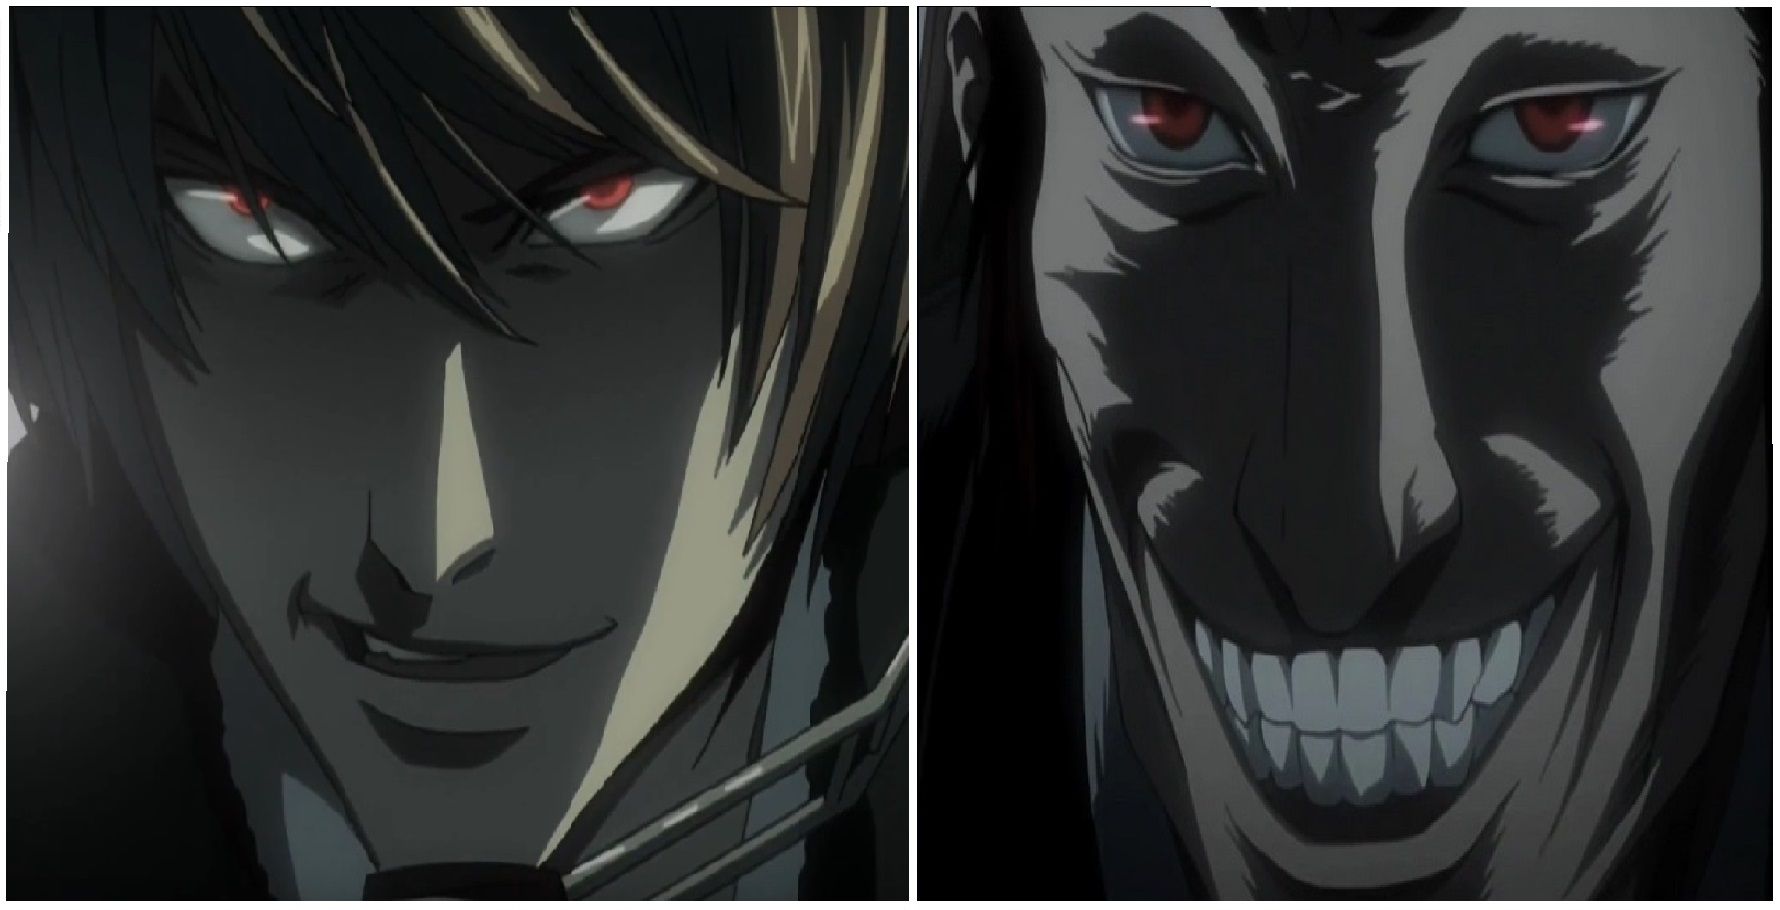 Is Death Note a scary anime? - Quora